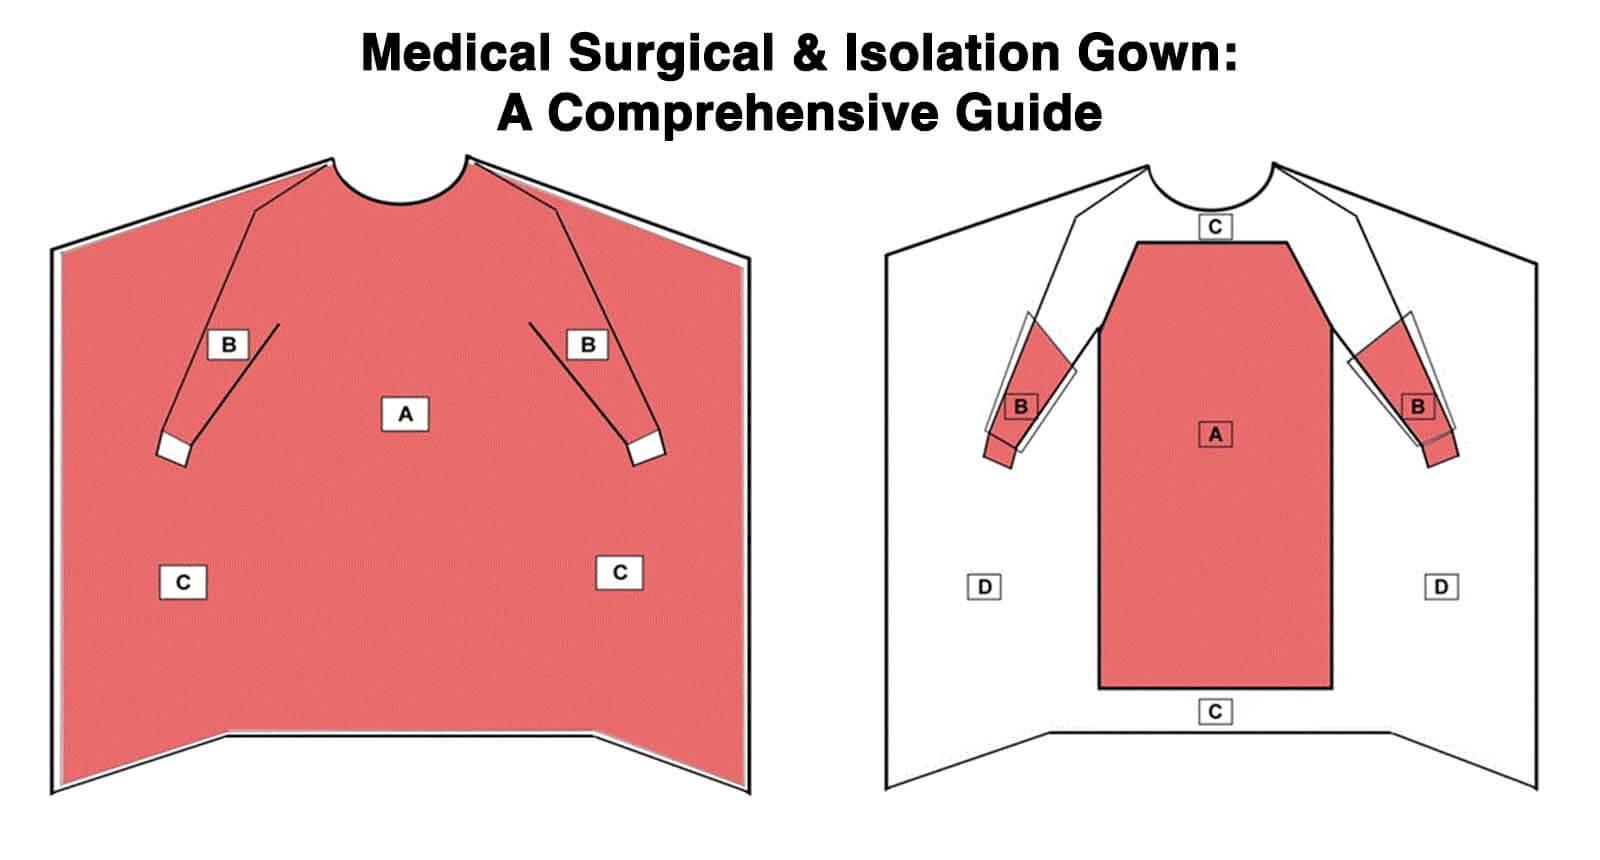 Medical Isolation & Surgical Gowns: A Comprehensive Guide